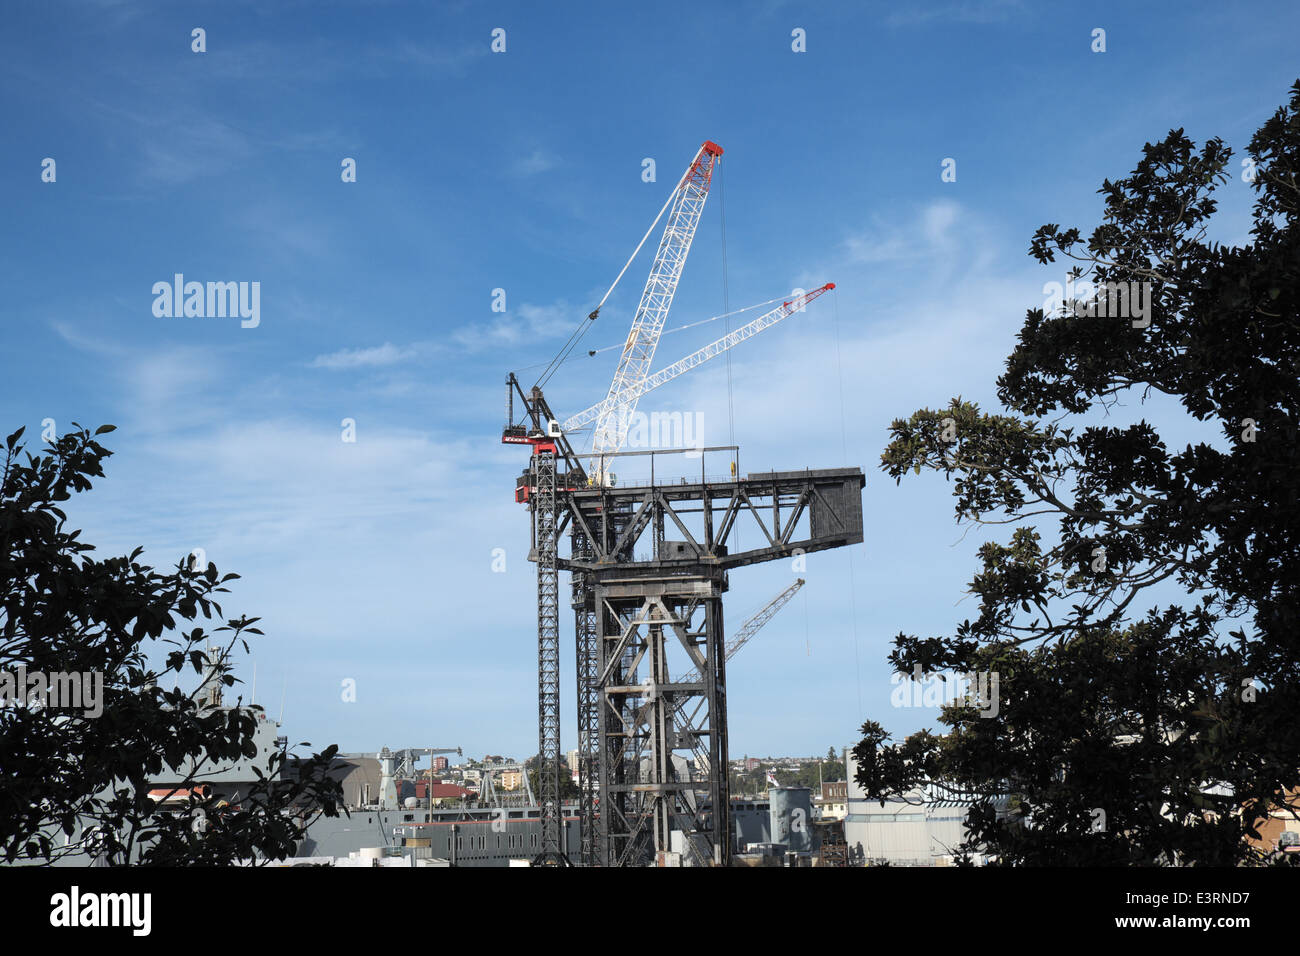 Hammerhead crane now being pulled down, at sydney's garden island naval base,new south wales,australia Stock Photo